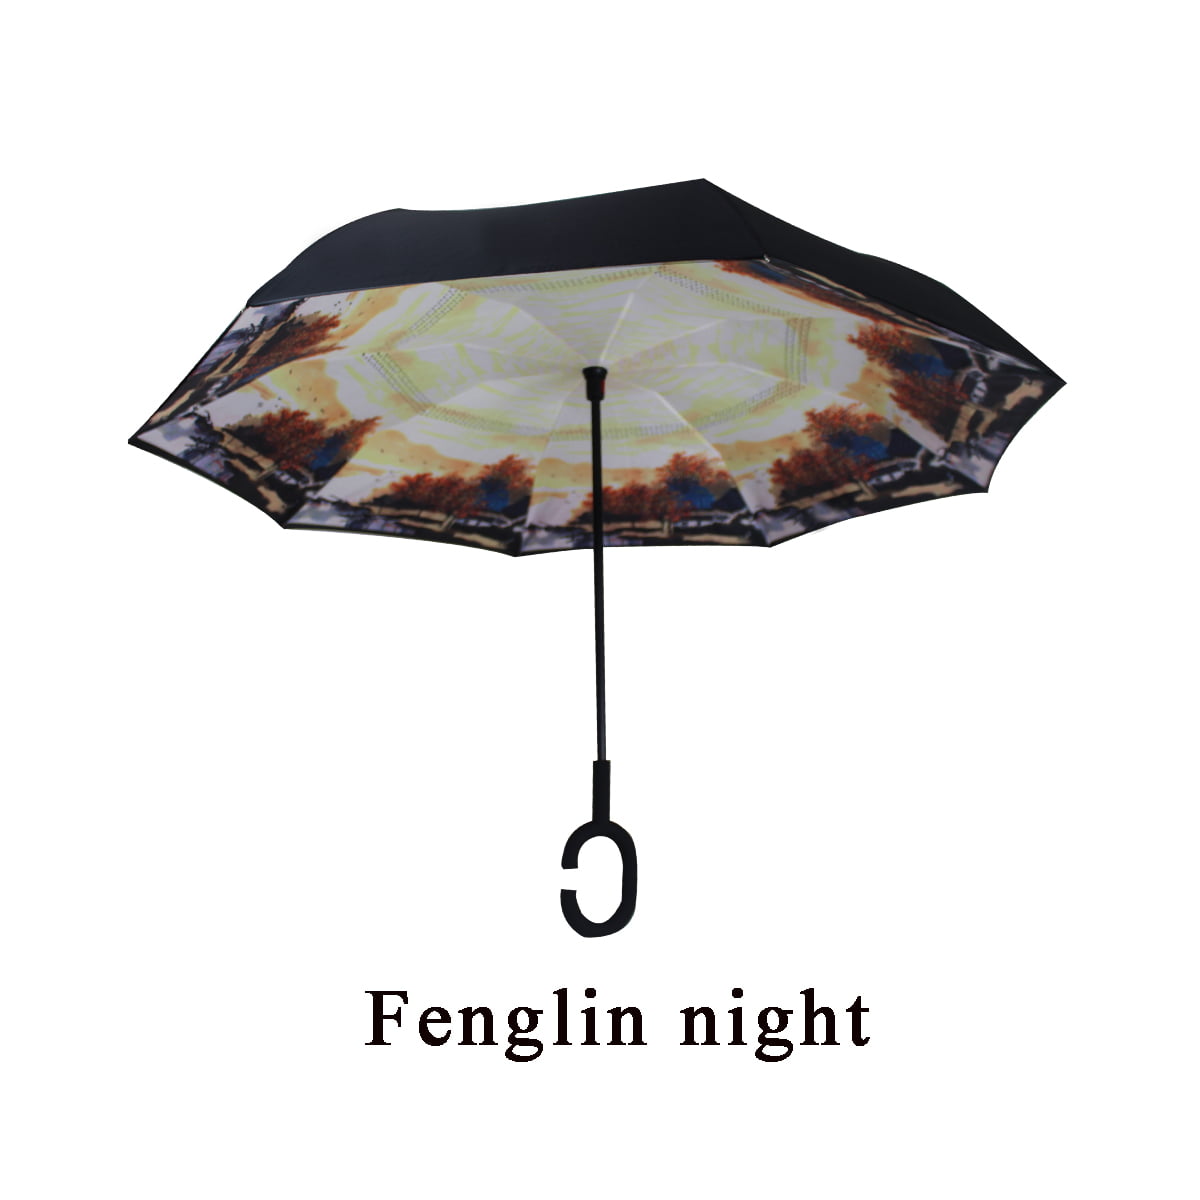 Double Layer Inverted Umbrella With C-Shaped Handle Happy Snoopy Reverse Windproof Umbrella UV Protection Upside Down Umbrella